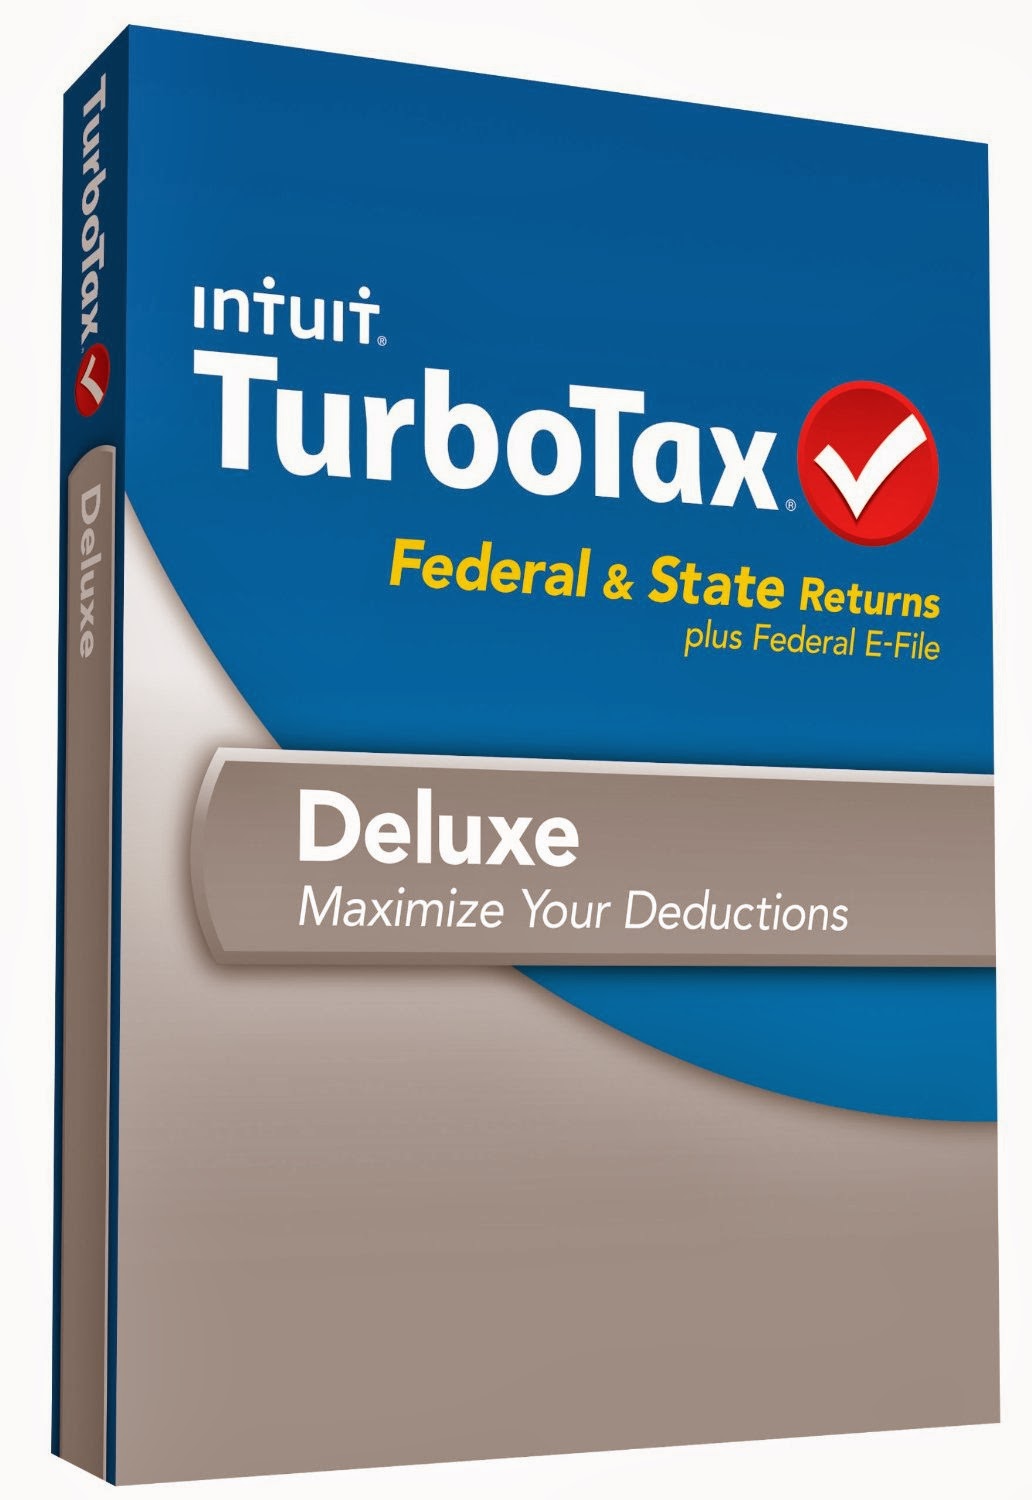 turbotax-deluxe-fed-efile-and-state-2013-with-refund-bonus-offer